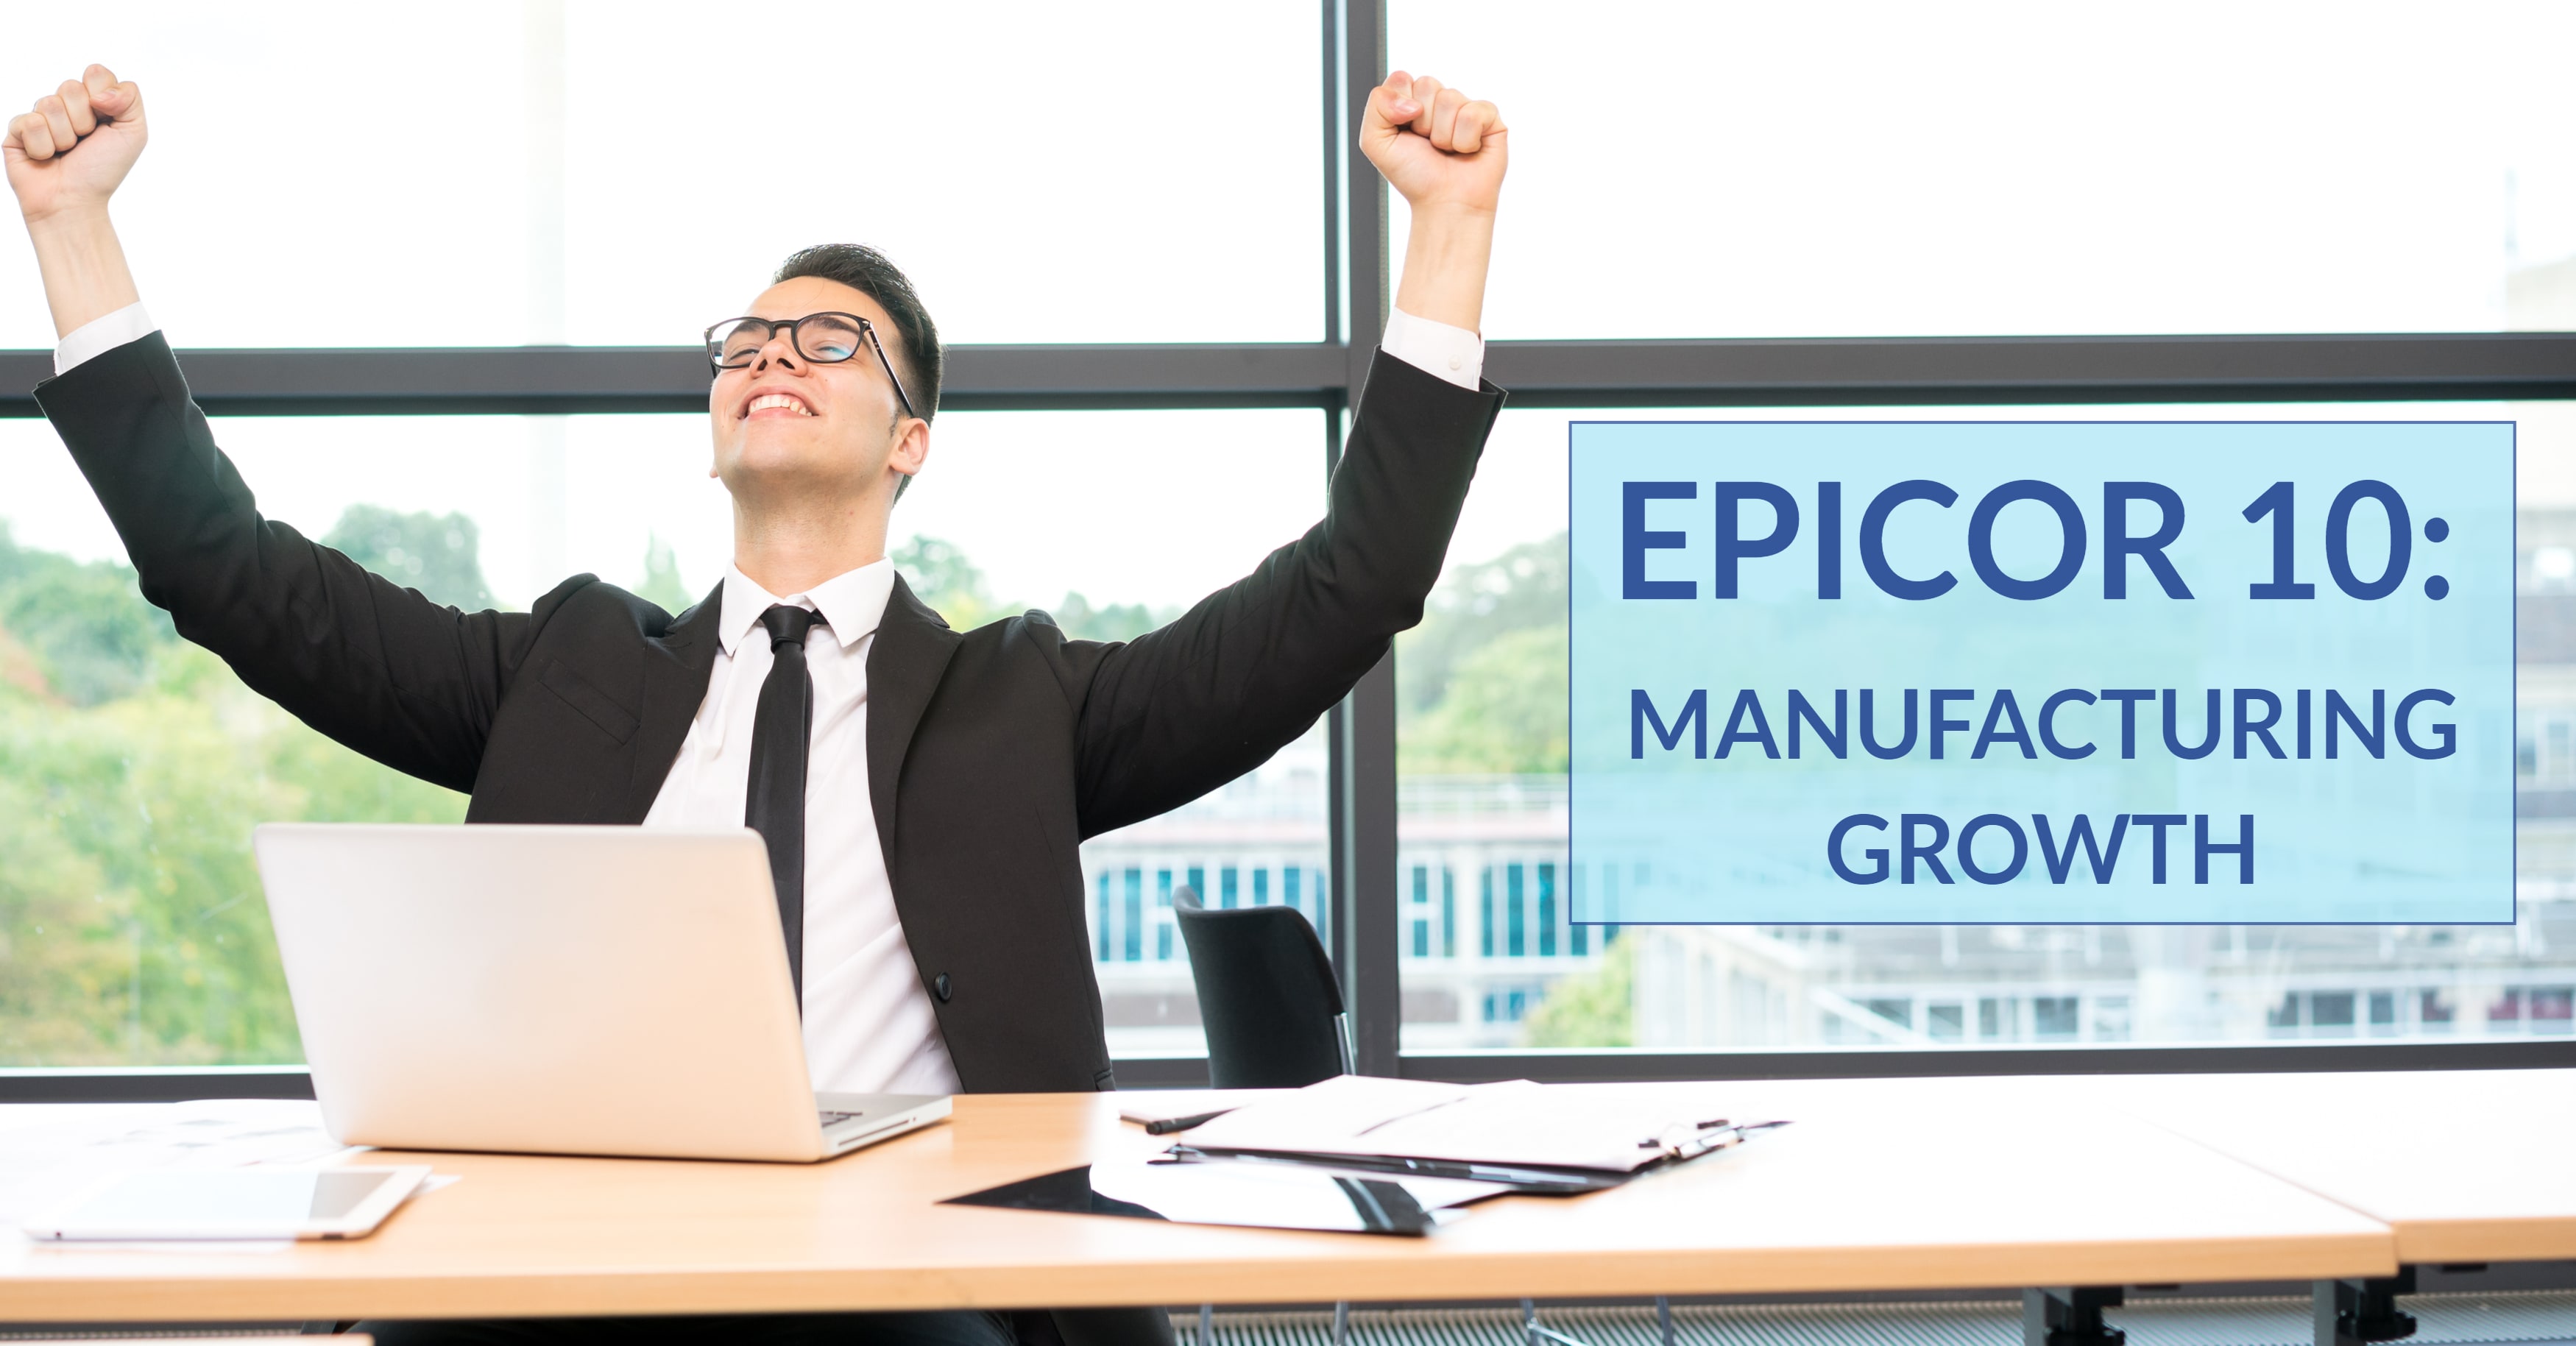 Epicor 10 Manufacturing Growth